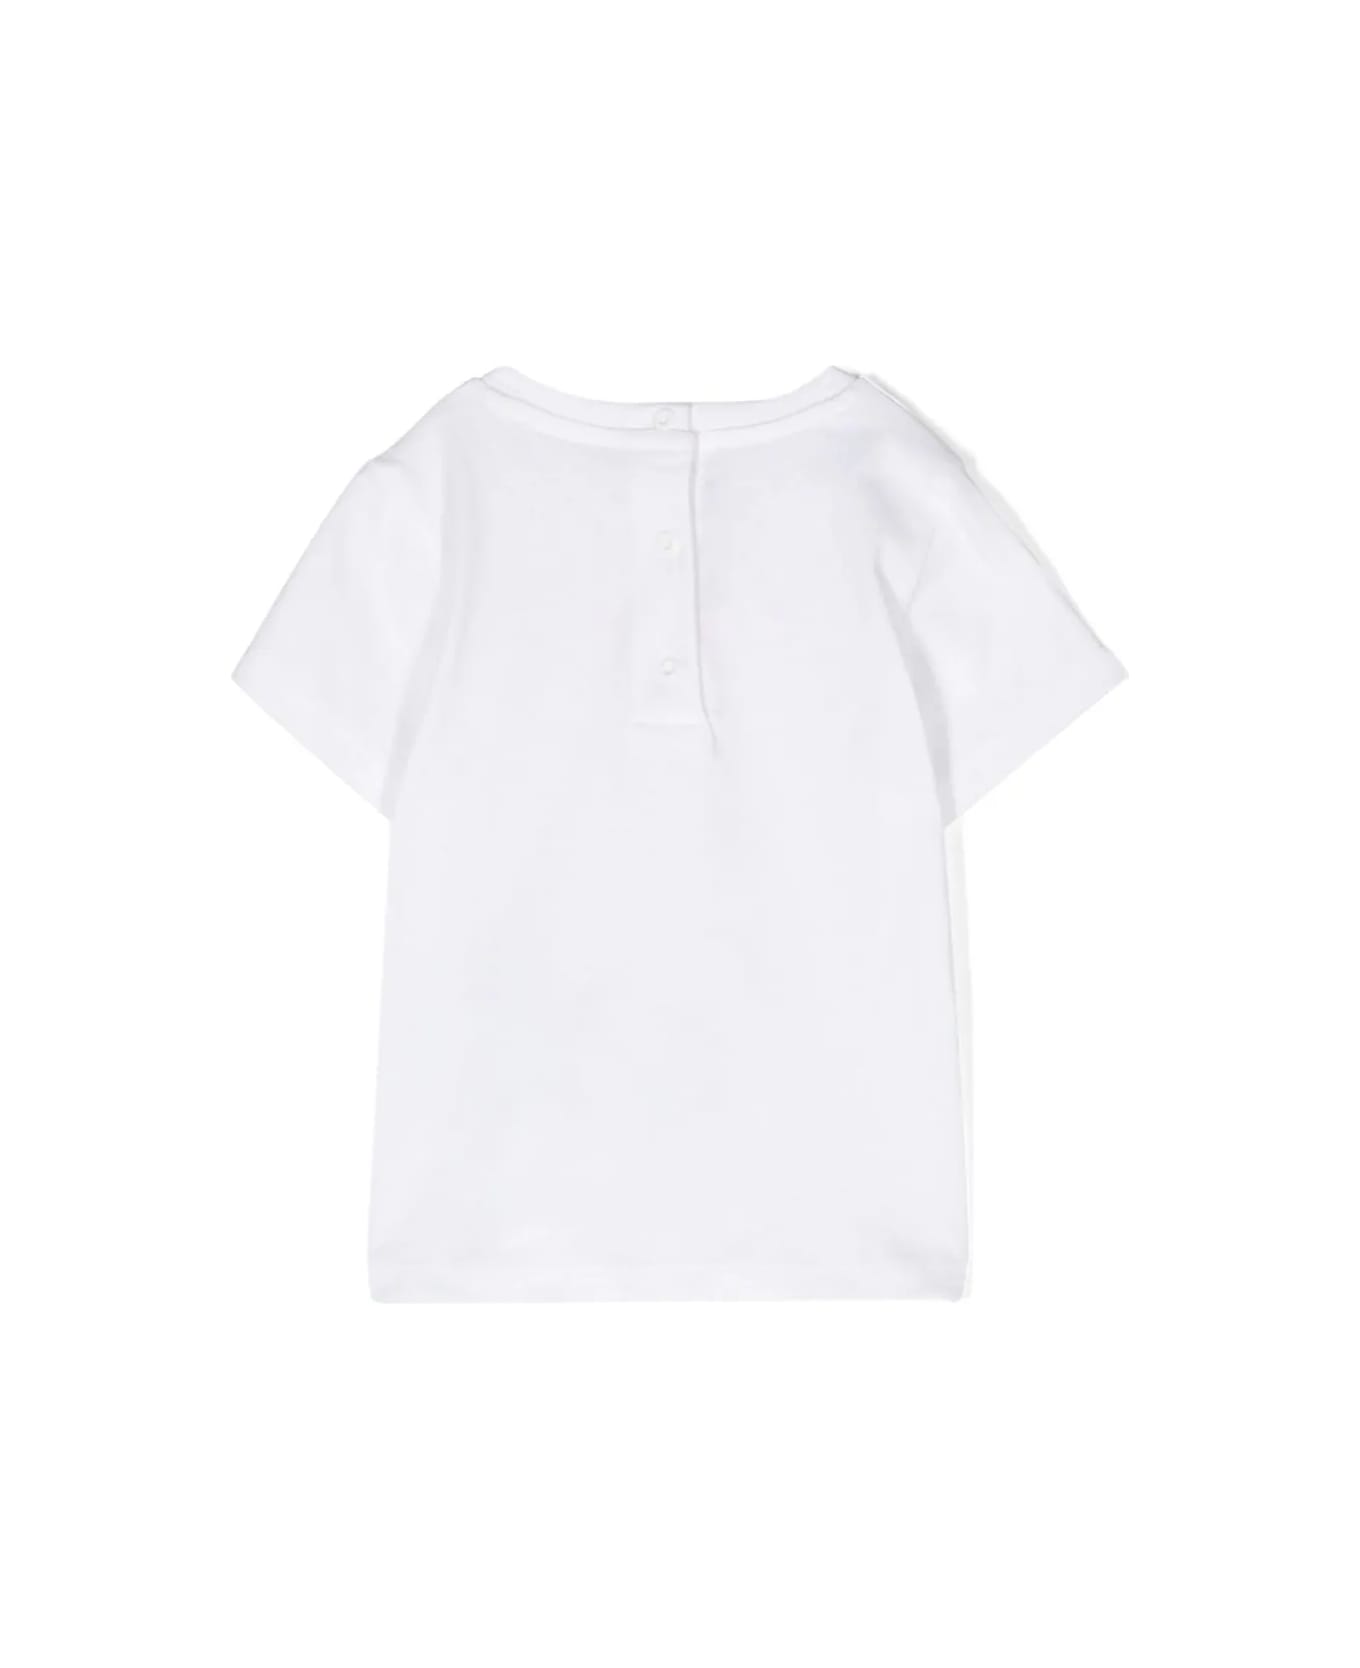 Balmain T-shirt With Embroidery - White Tシャツ＆ポロシャツ